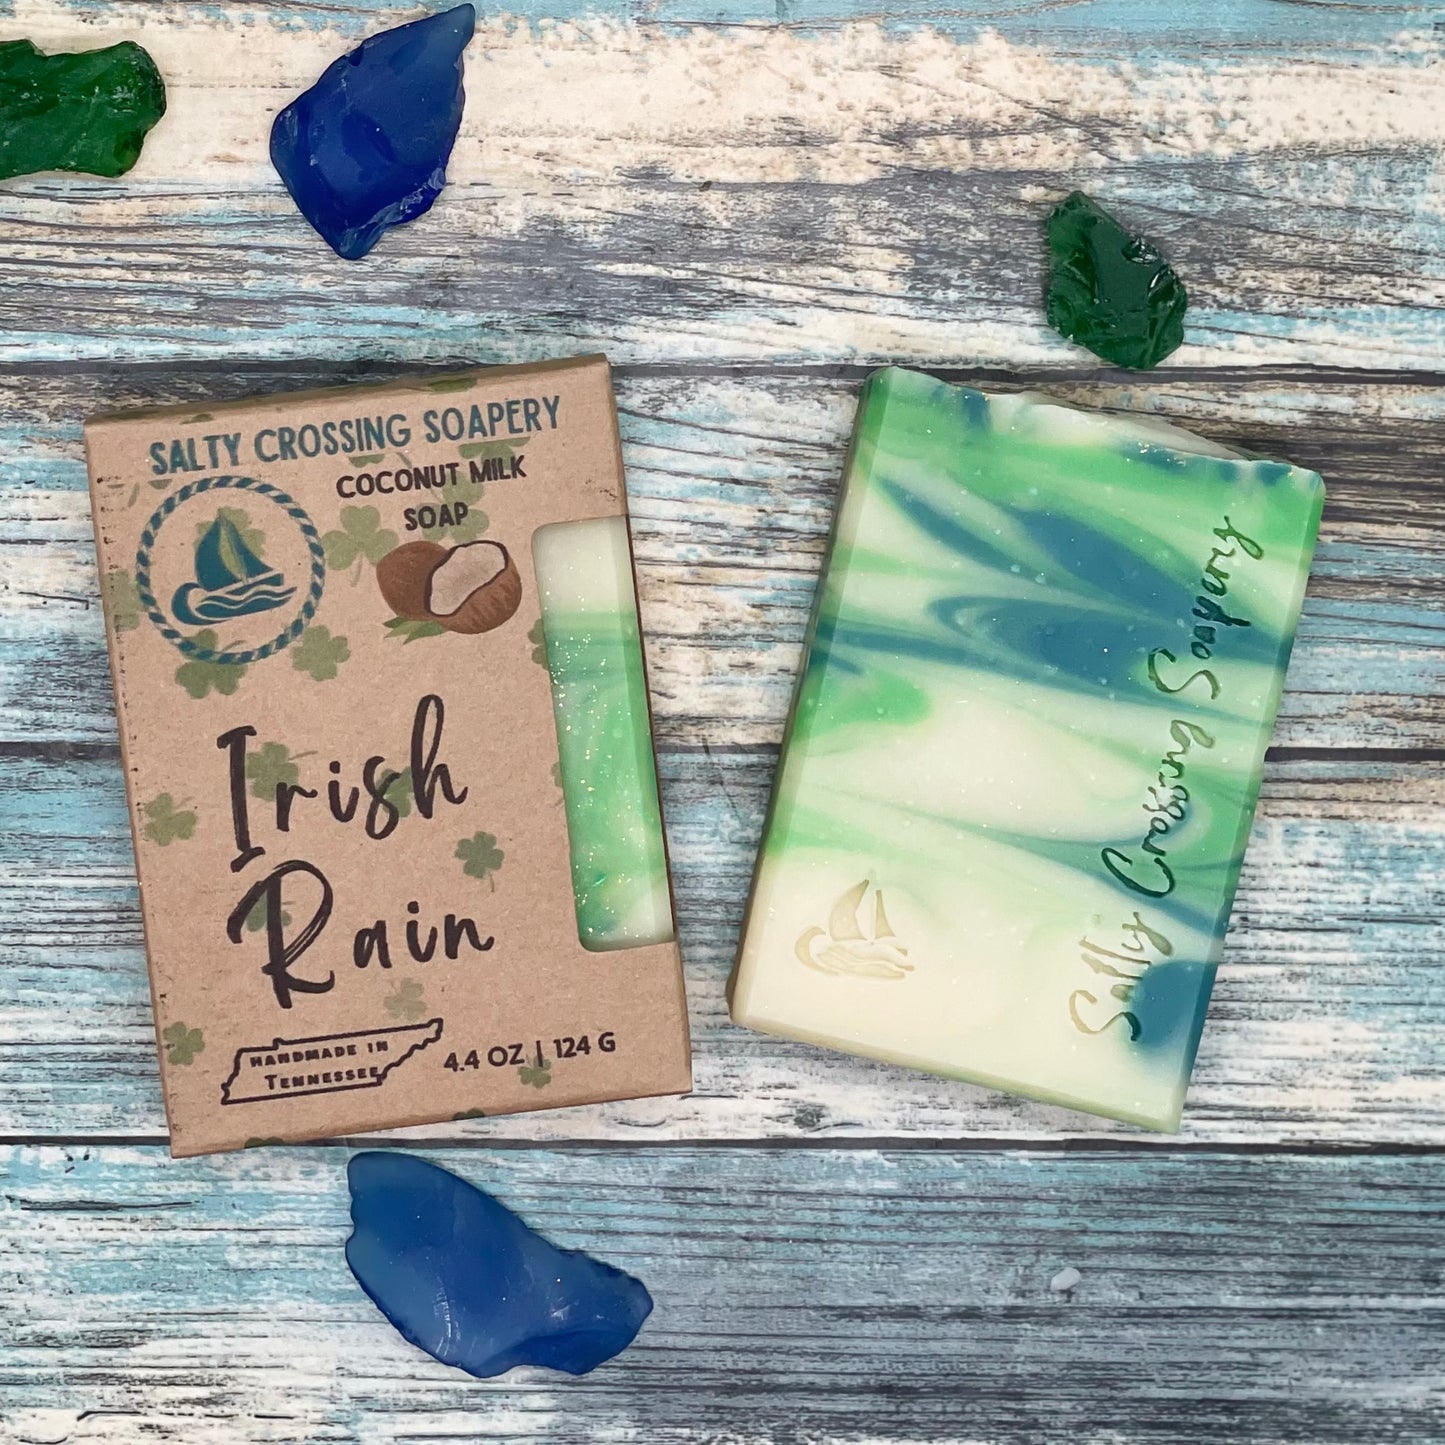 Irish rain handmade soap with box. Soap bar is green and white swirled with small sailboat graphic and salty crossing Soapery text stamped on the front. The box is kraft paperboard with color text and graphics